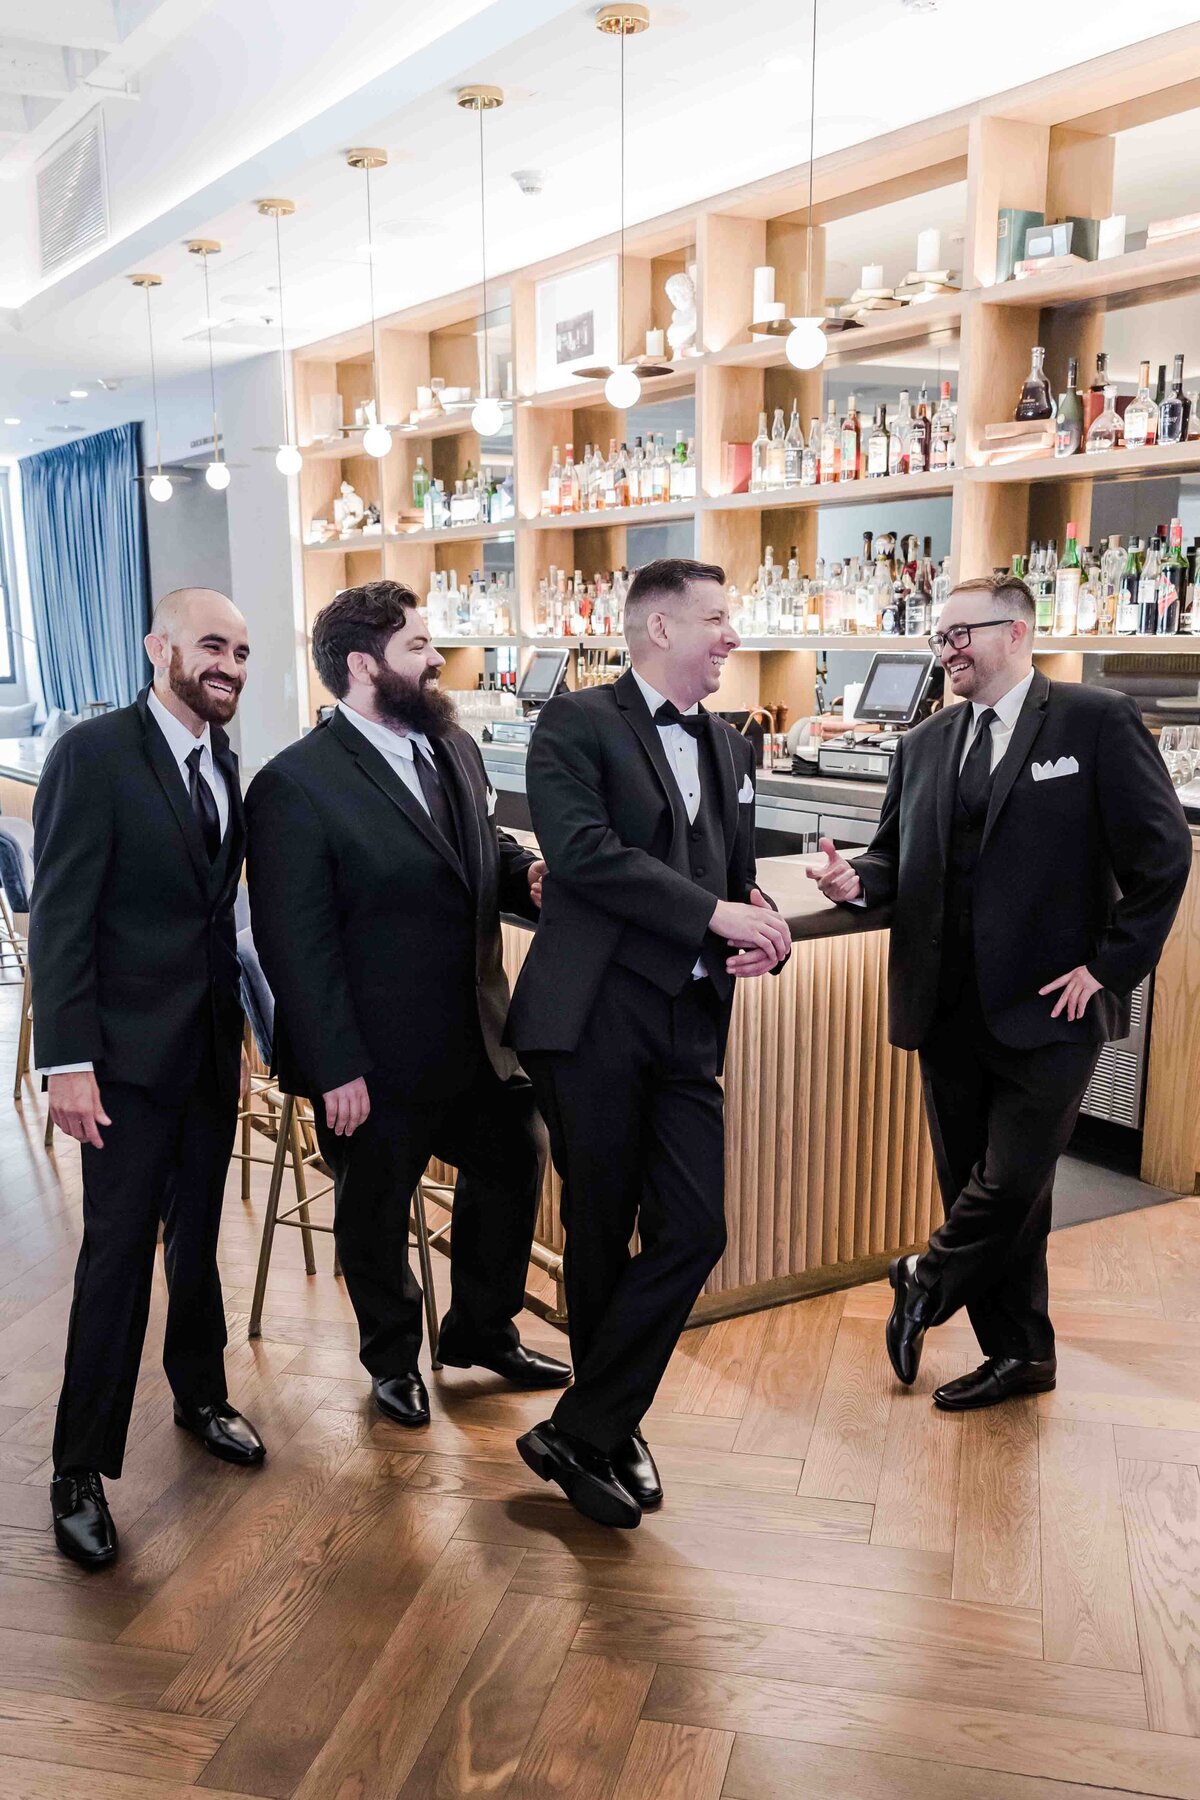 Groom-and-groomsmen-at-bar-guild-hotel